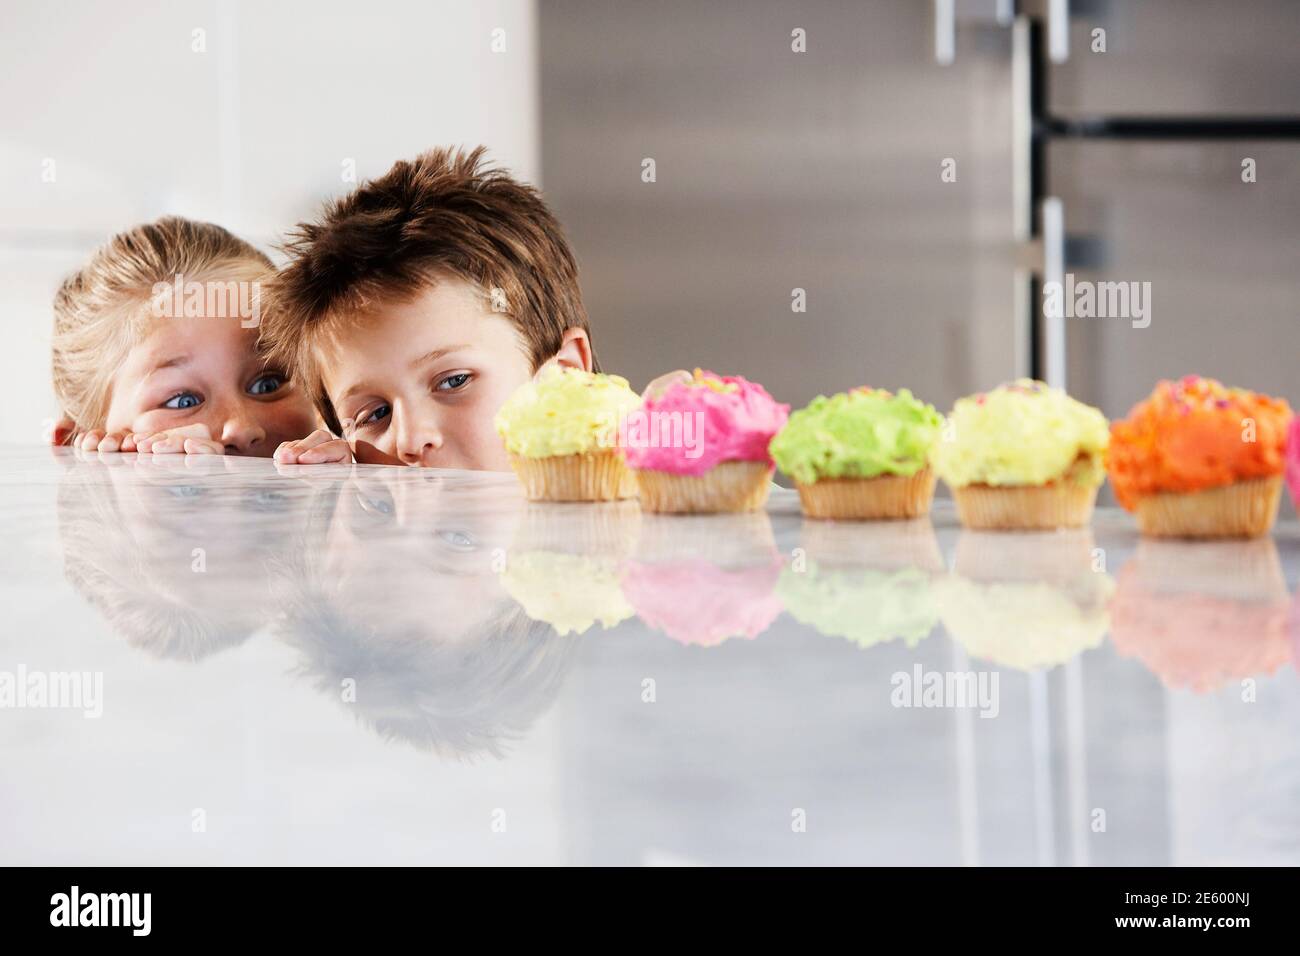 Young girl and boy peeking over counter at row of cupcakes Stock Photo